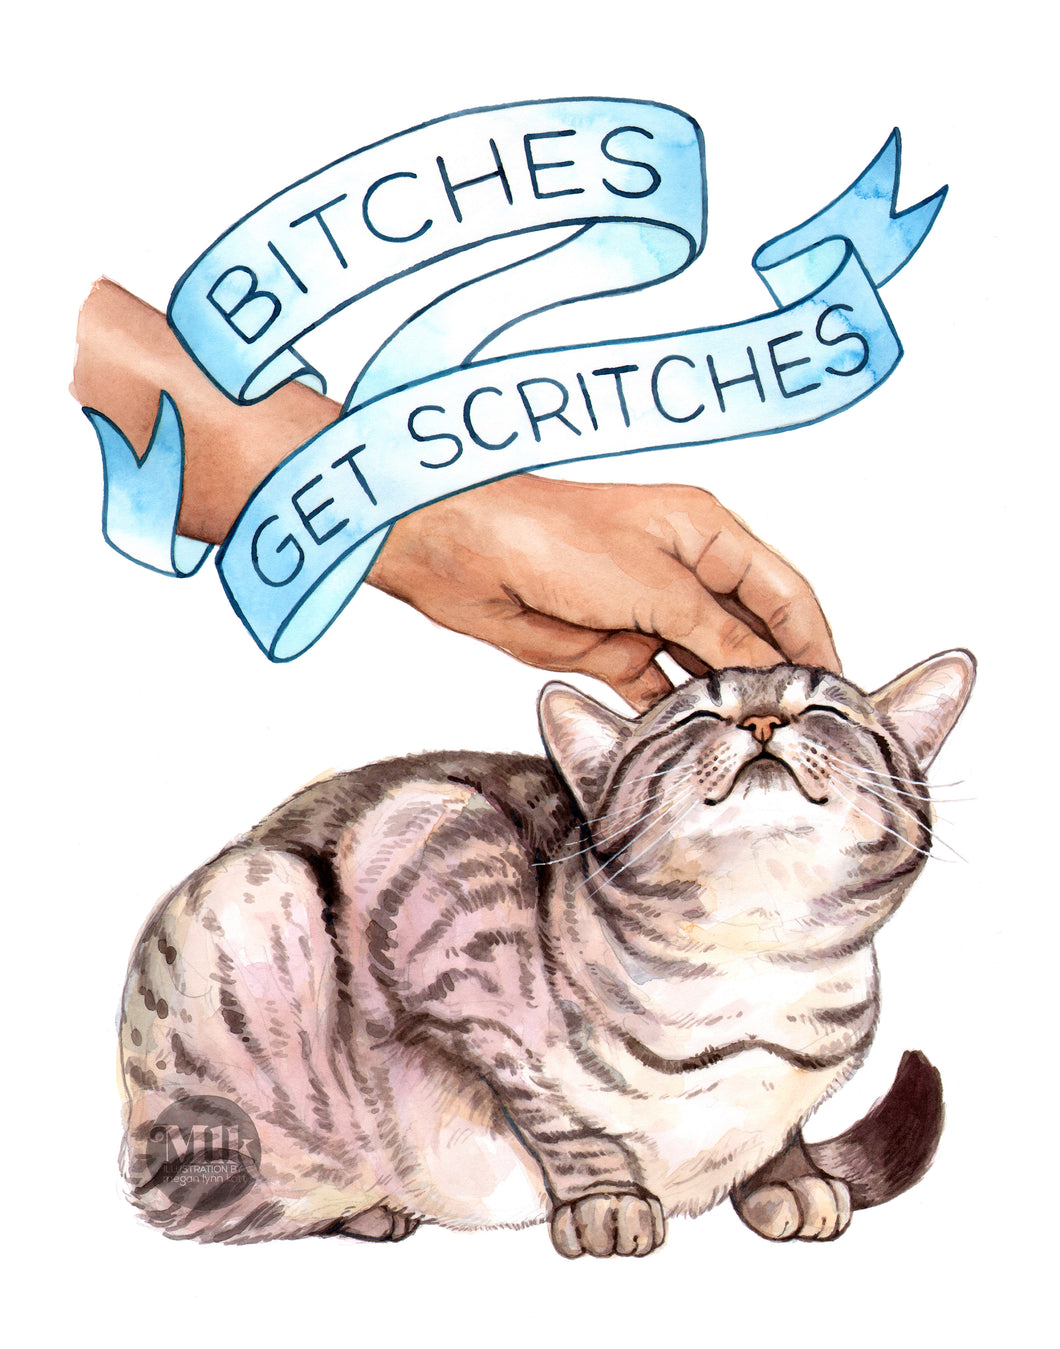 Bitches Get Scritches - 11x14